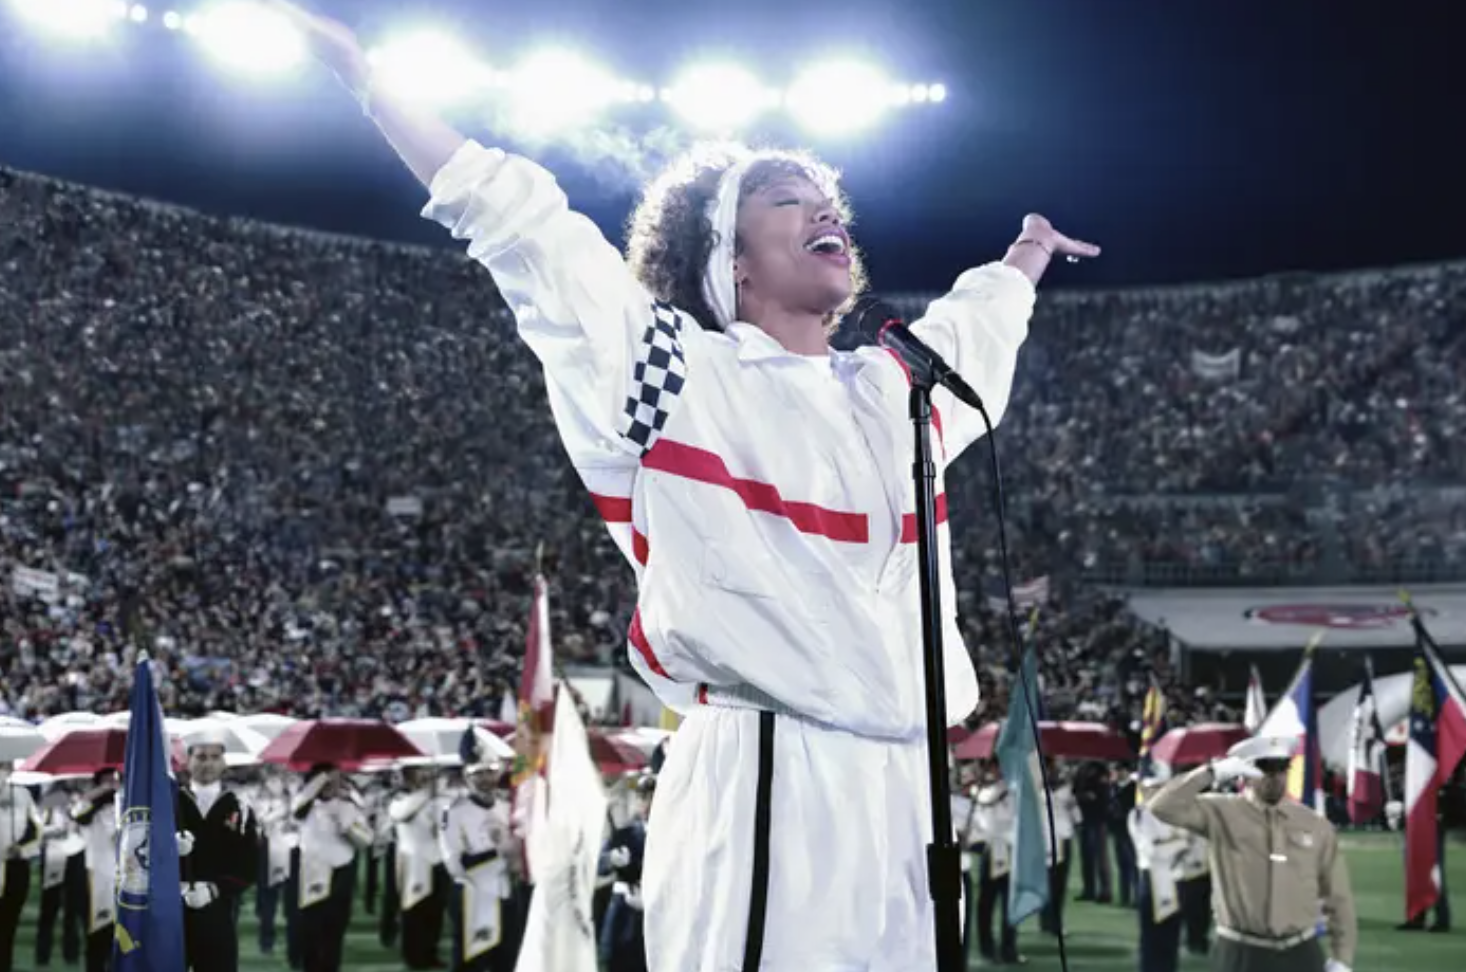 Naomi Ackie as Whitney Houston singing in a crowded football stadium